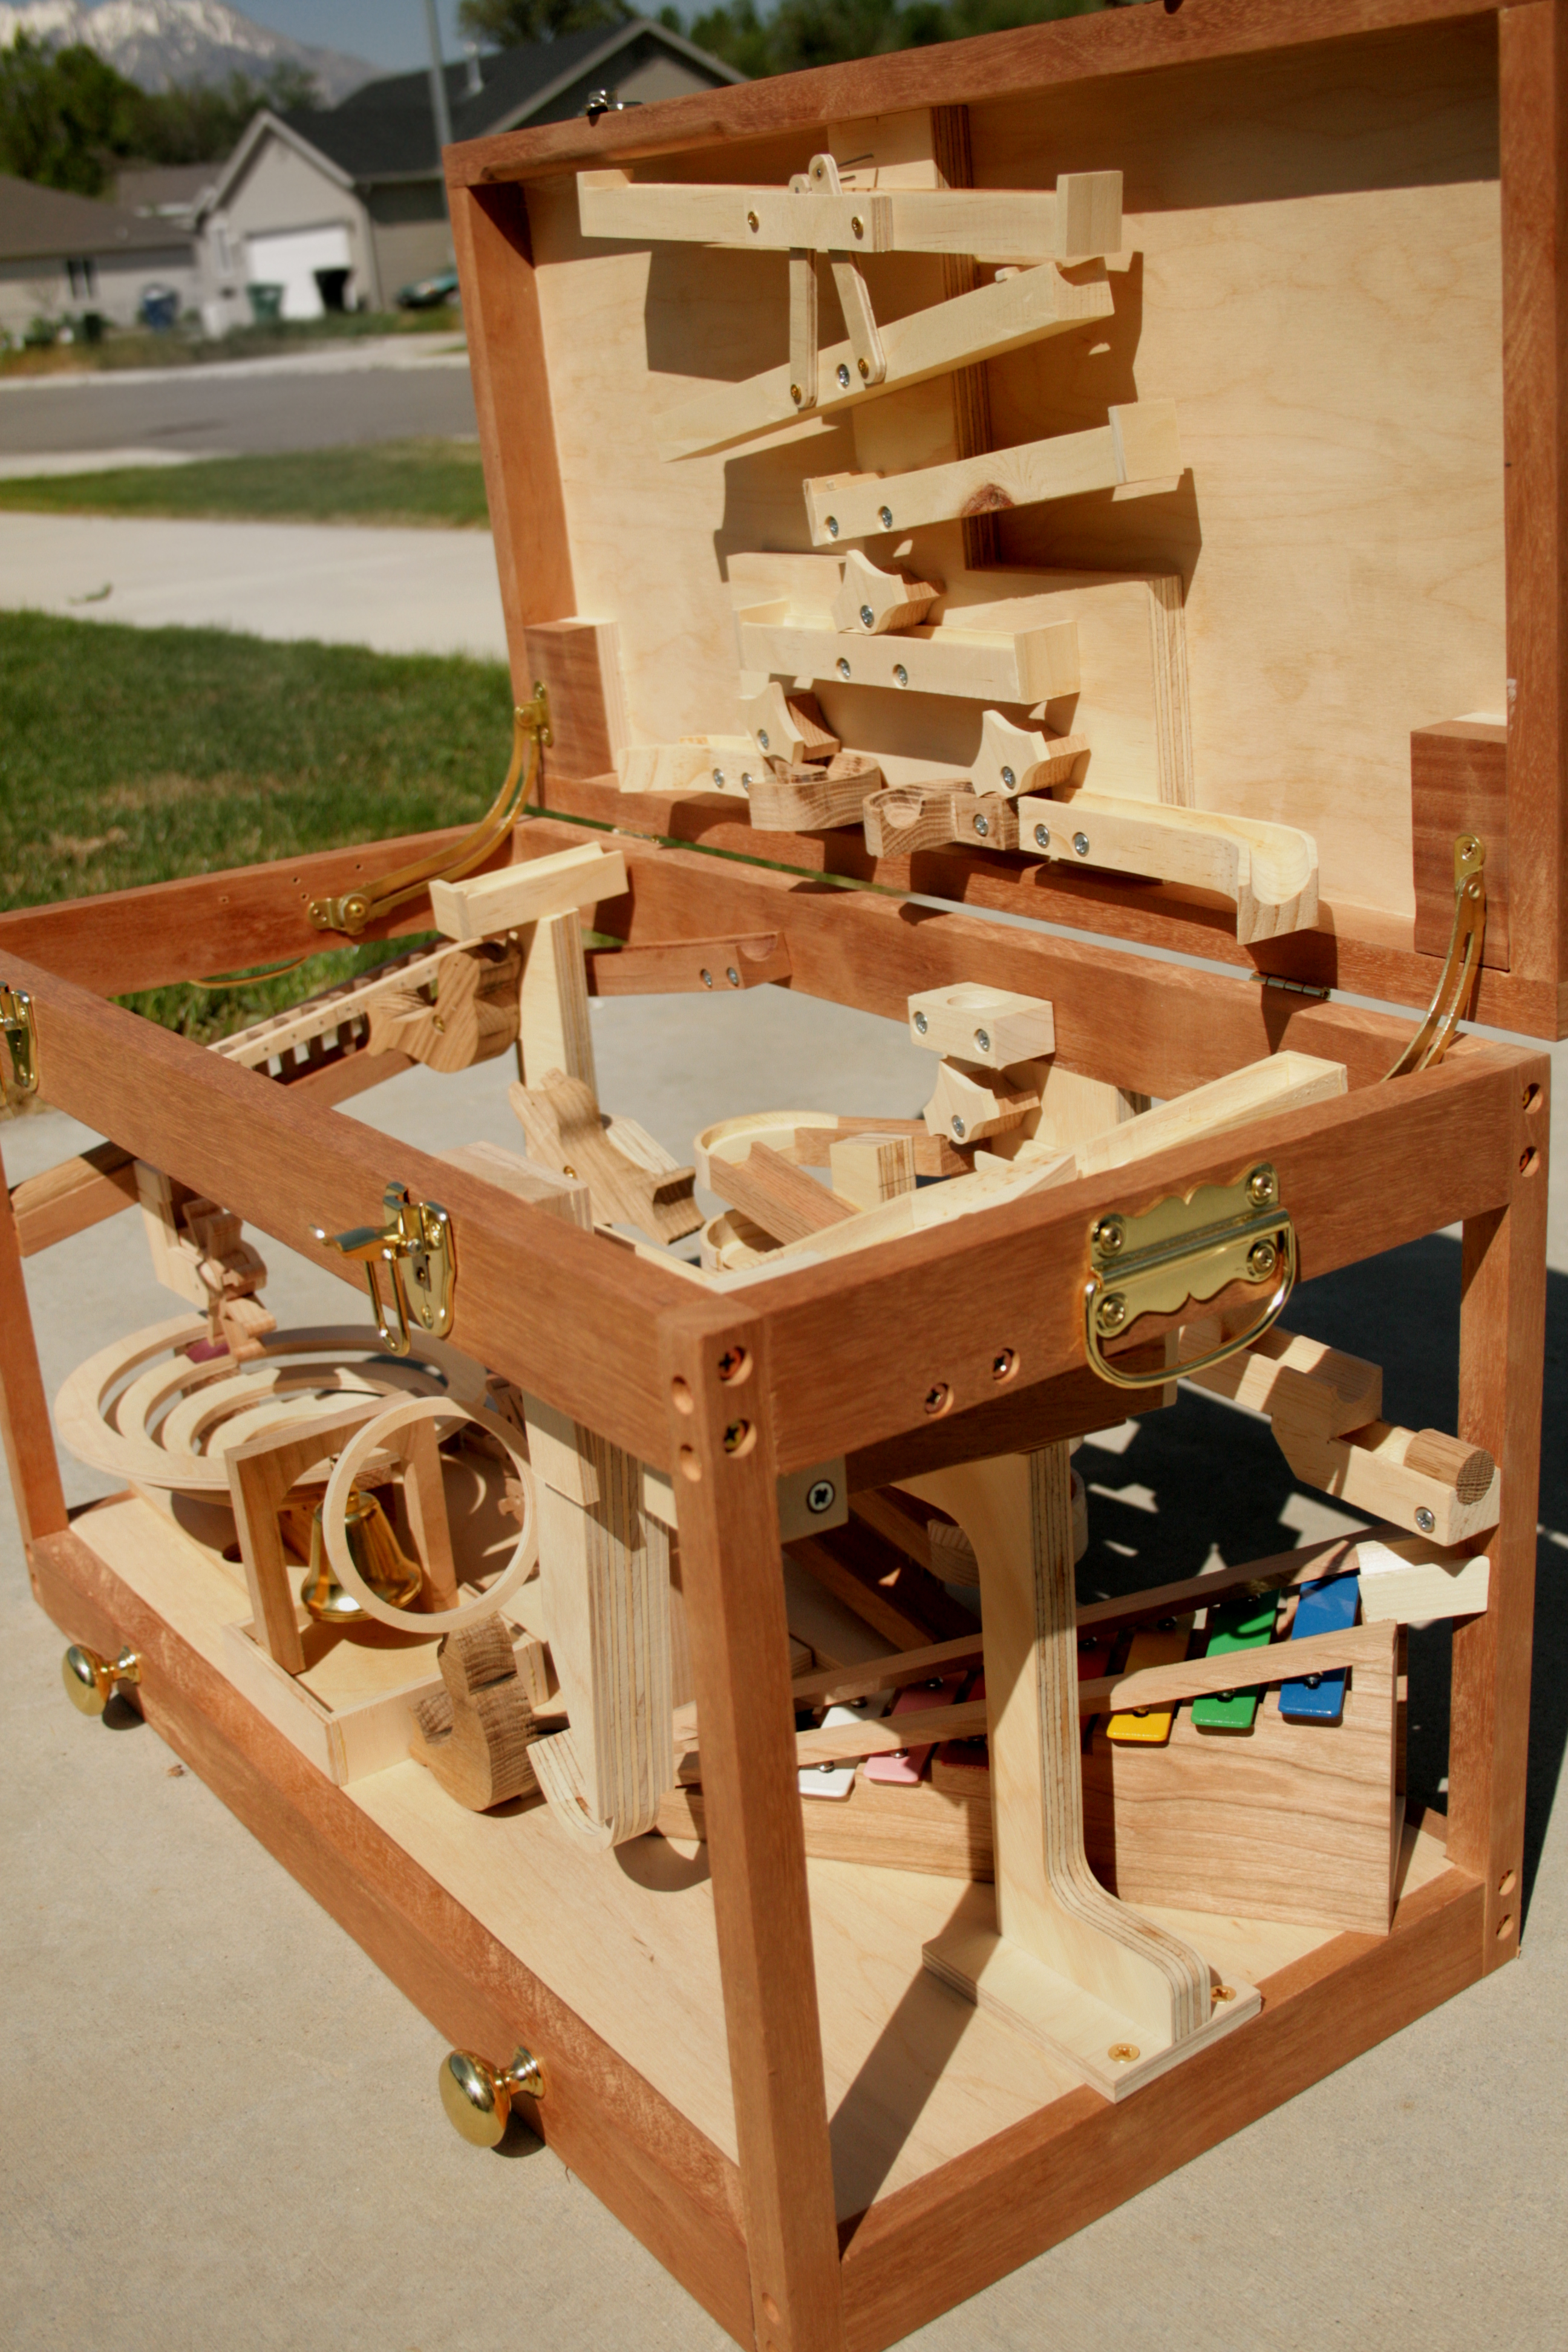 wooden marble run | The Workbench